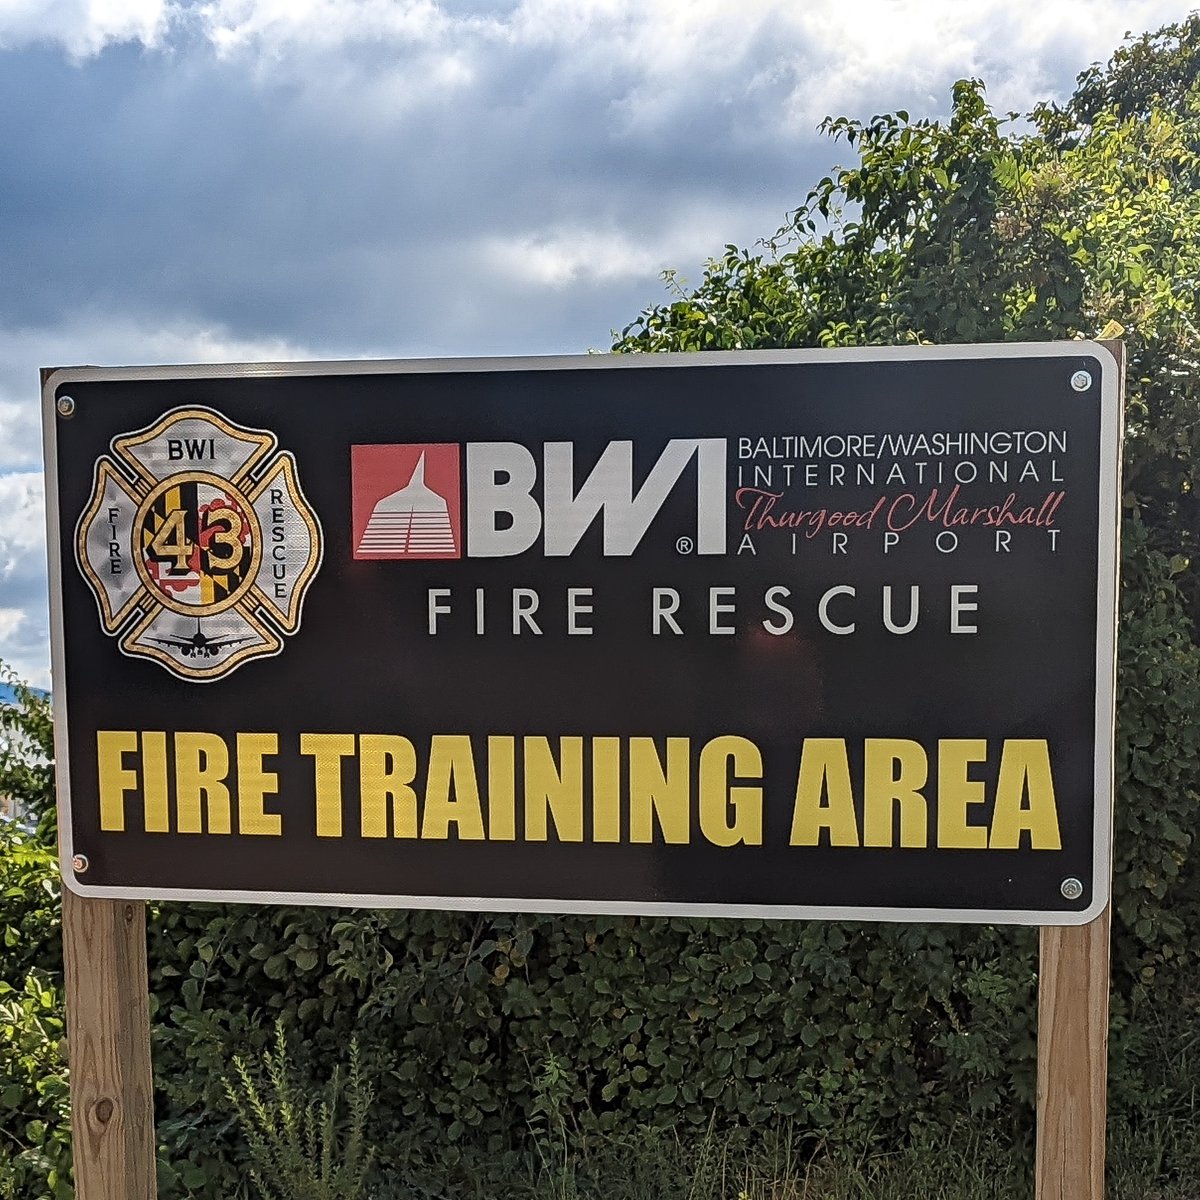 The @BWIfire team will perform a training exercise this morning, beginning at approx. 5:30am. Please do not be alarmed by the presence of smoke and/or fire near the airport. This is only a training. #MDOTsafety